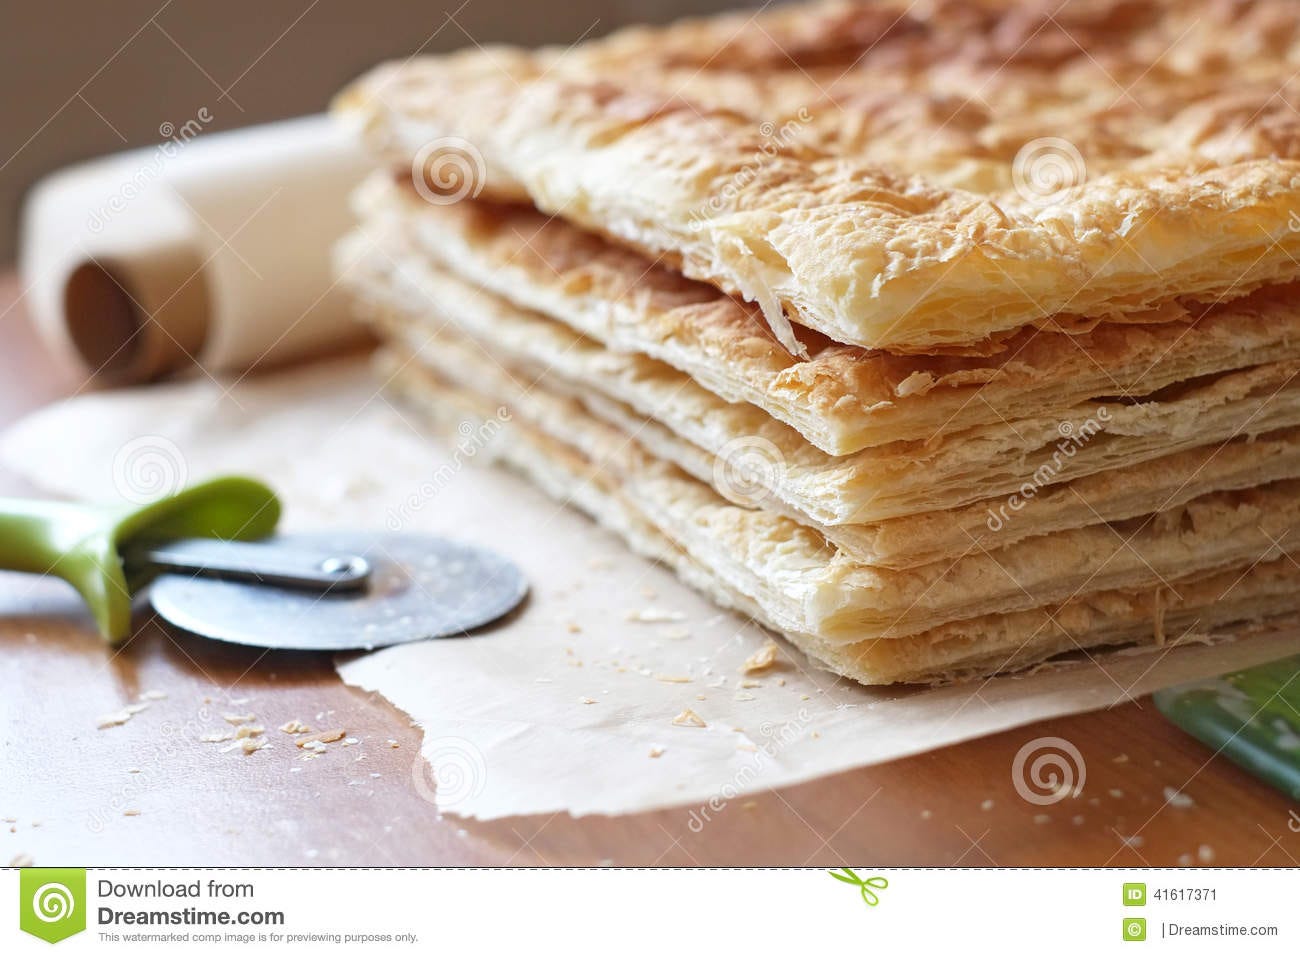 Puff Pastry in the Making stock image. Image of making - 41617371